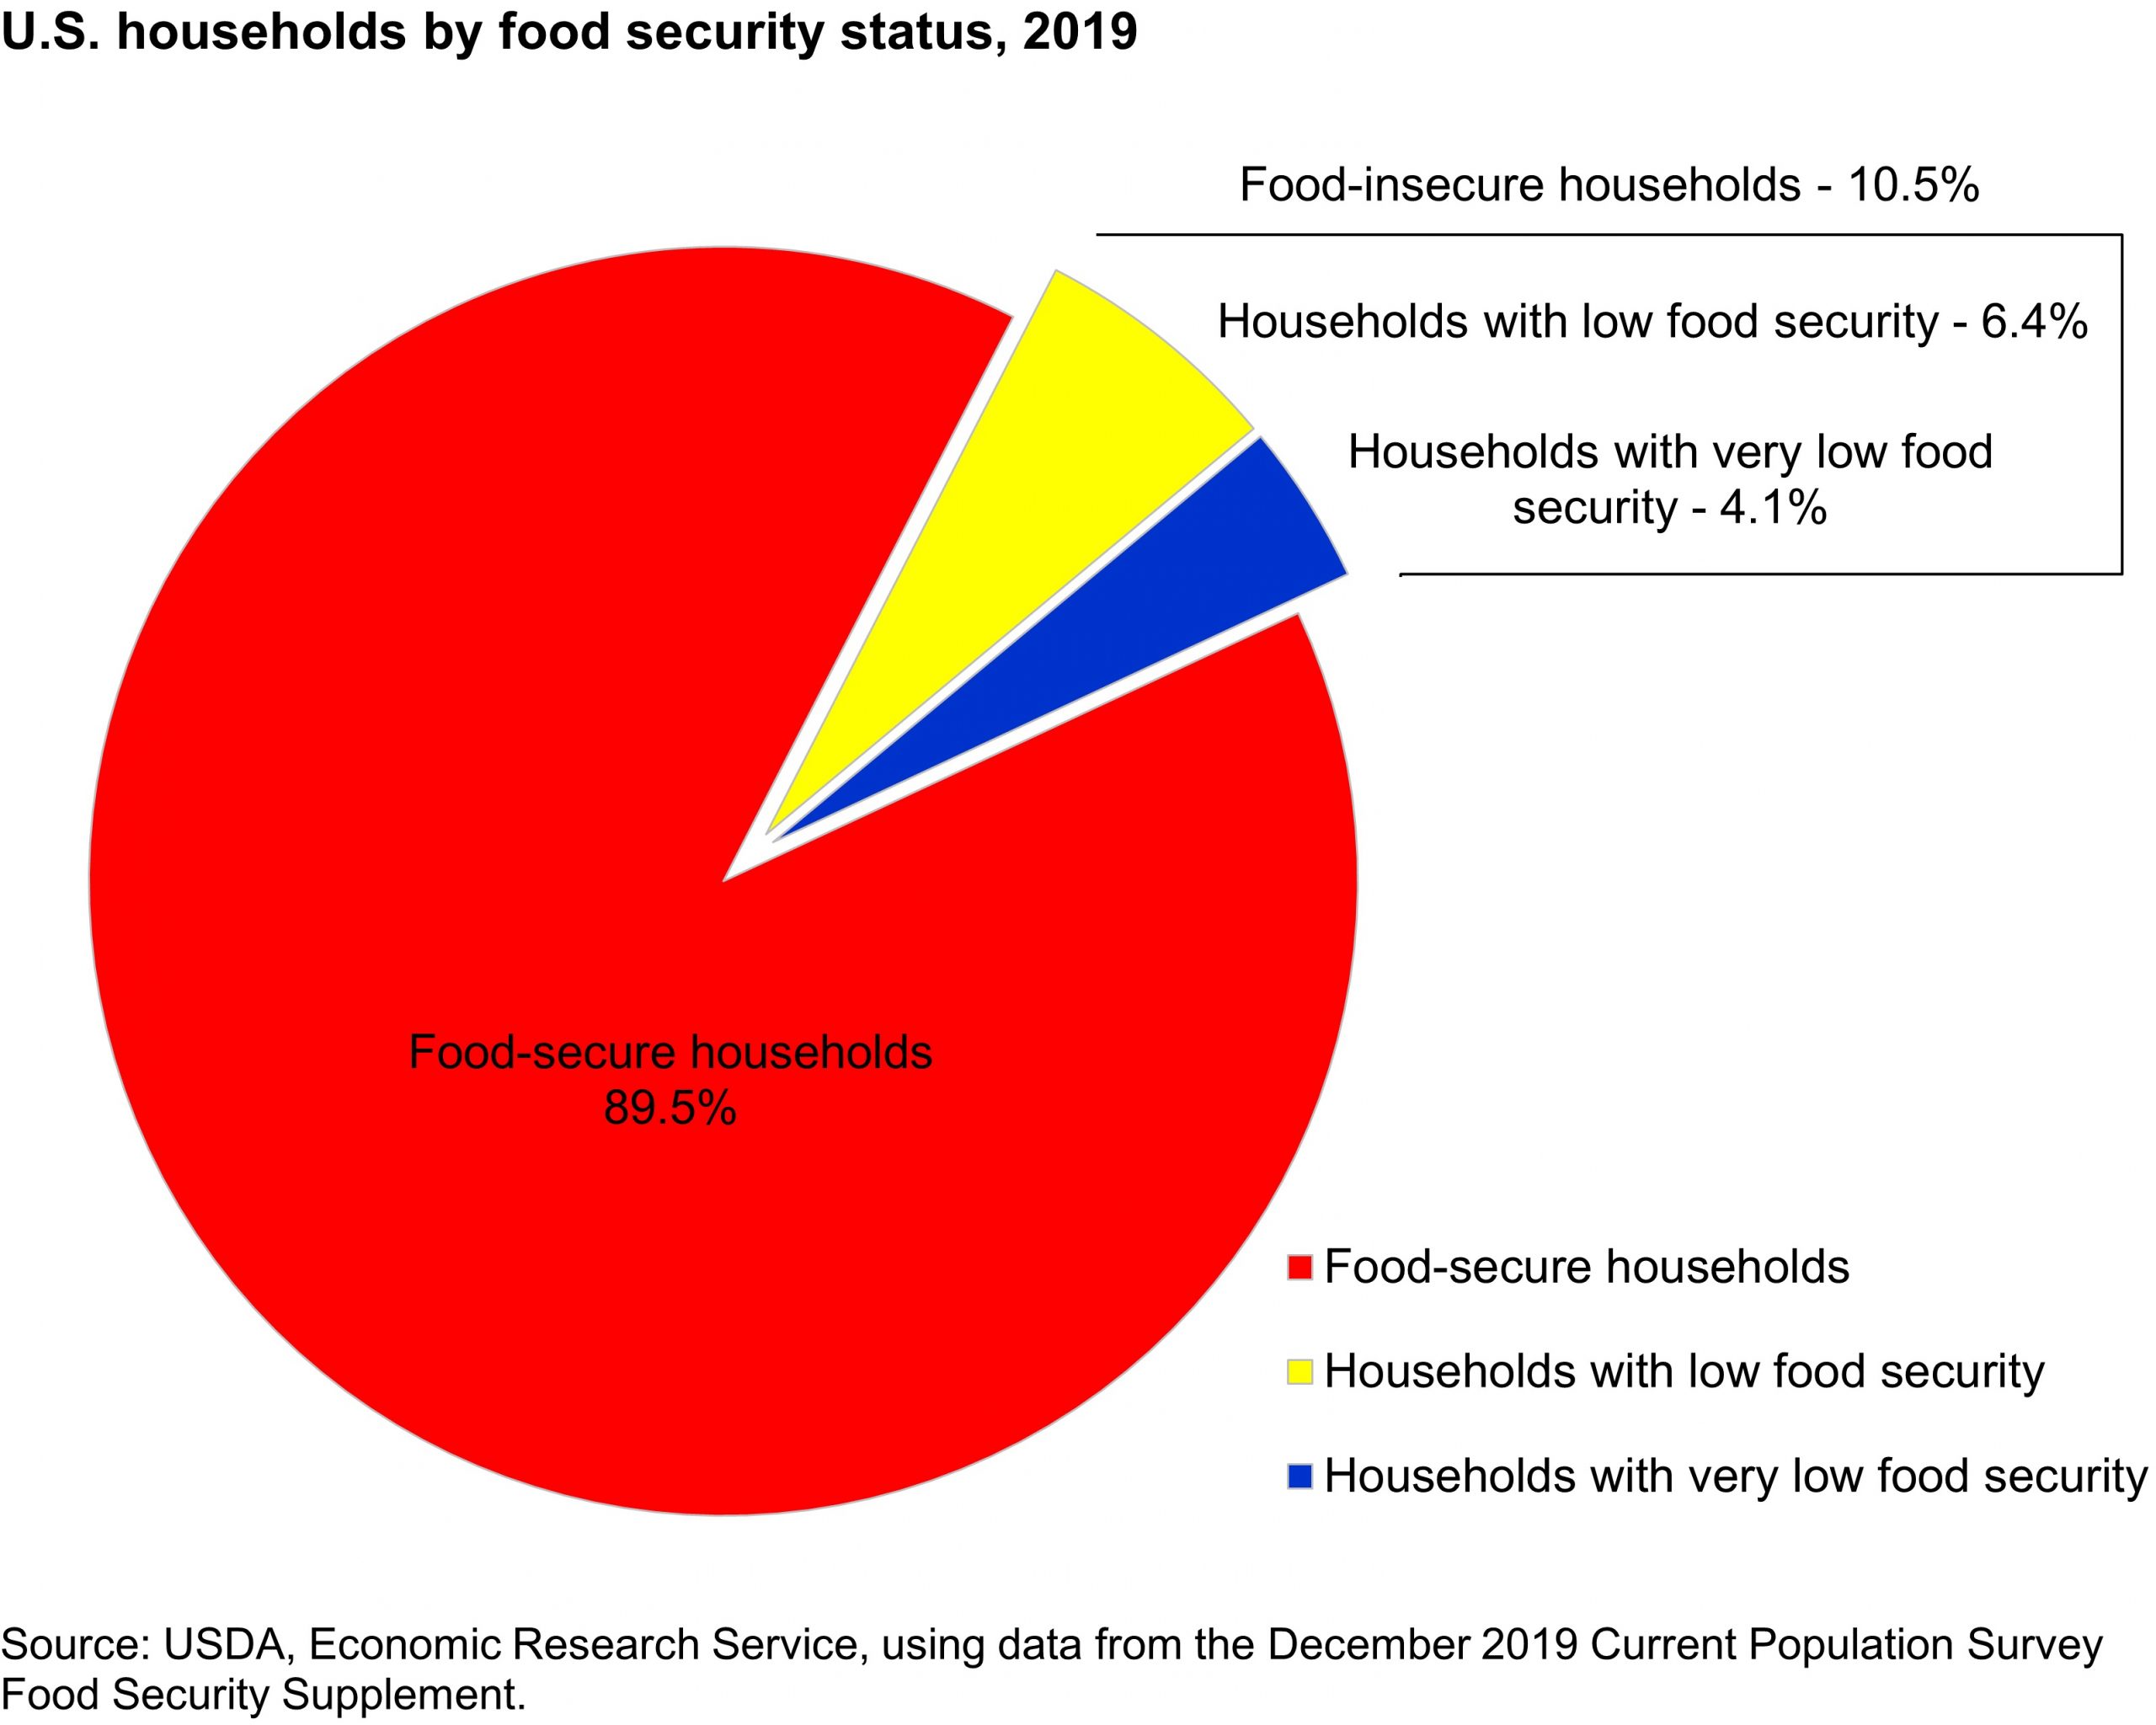 Almost 90% of US Households are food secure, the rest have either low food security (6.4%) or very low food security (4.1%).